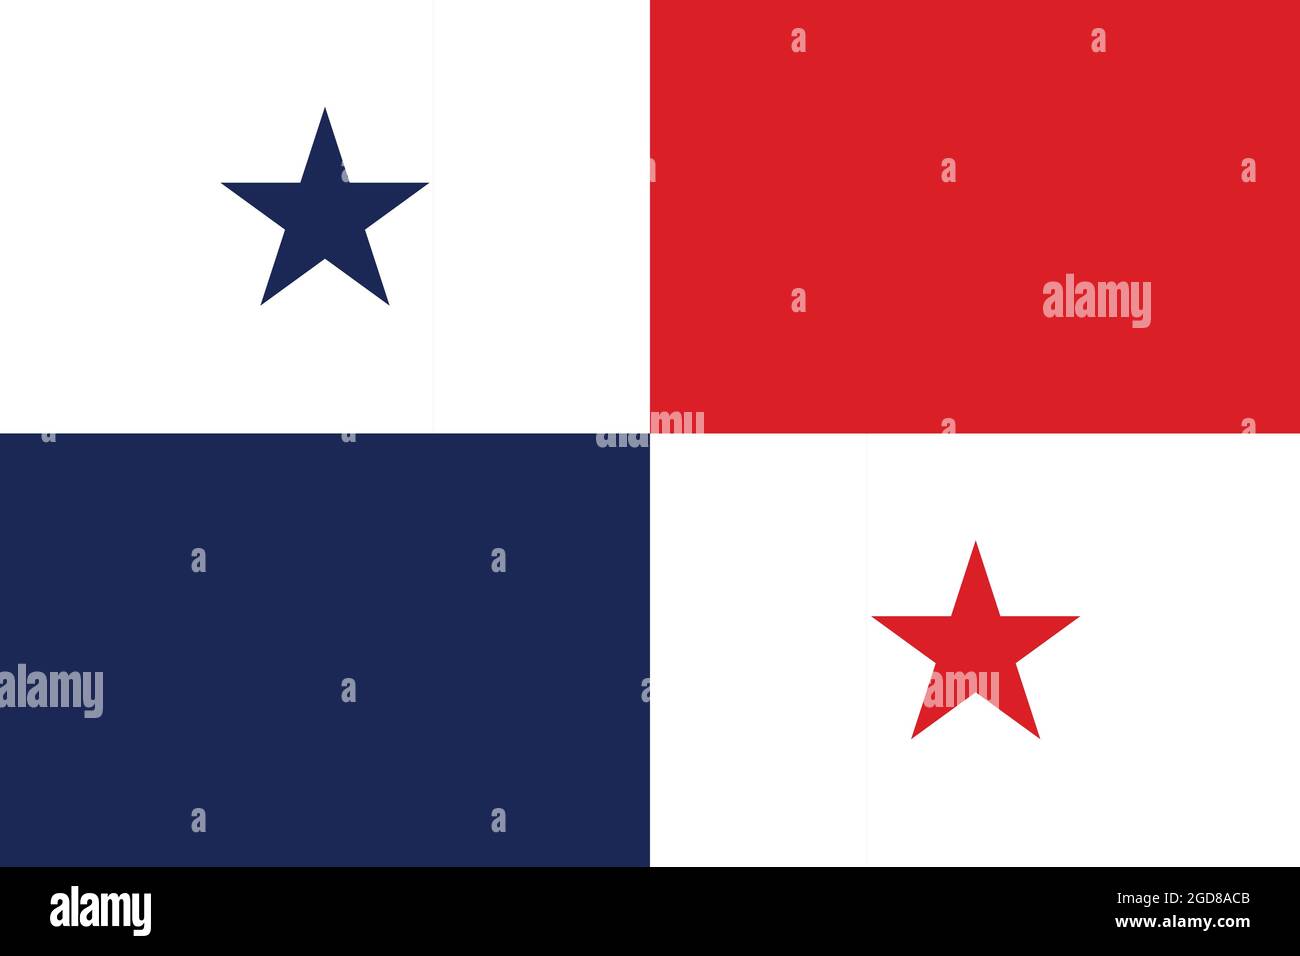 National flag of Panama original size and colors vector illustration, Panamanian flag day Fiestas Patrias, Republic of Panama flag designed by Manuel Stock Vector